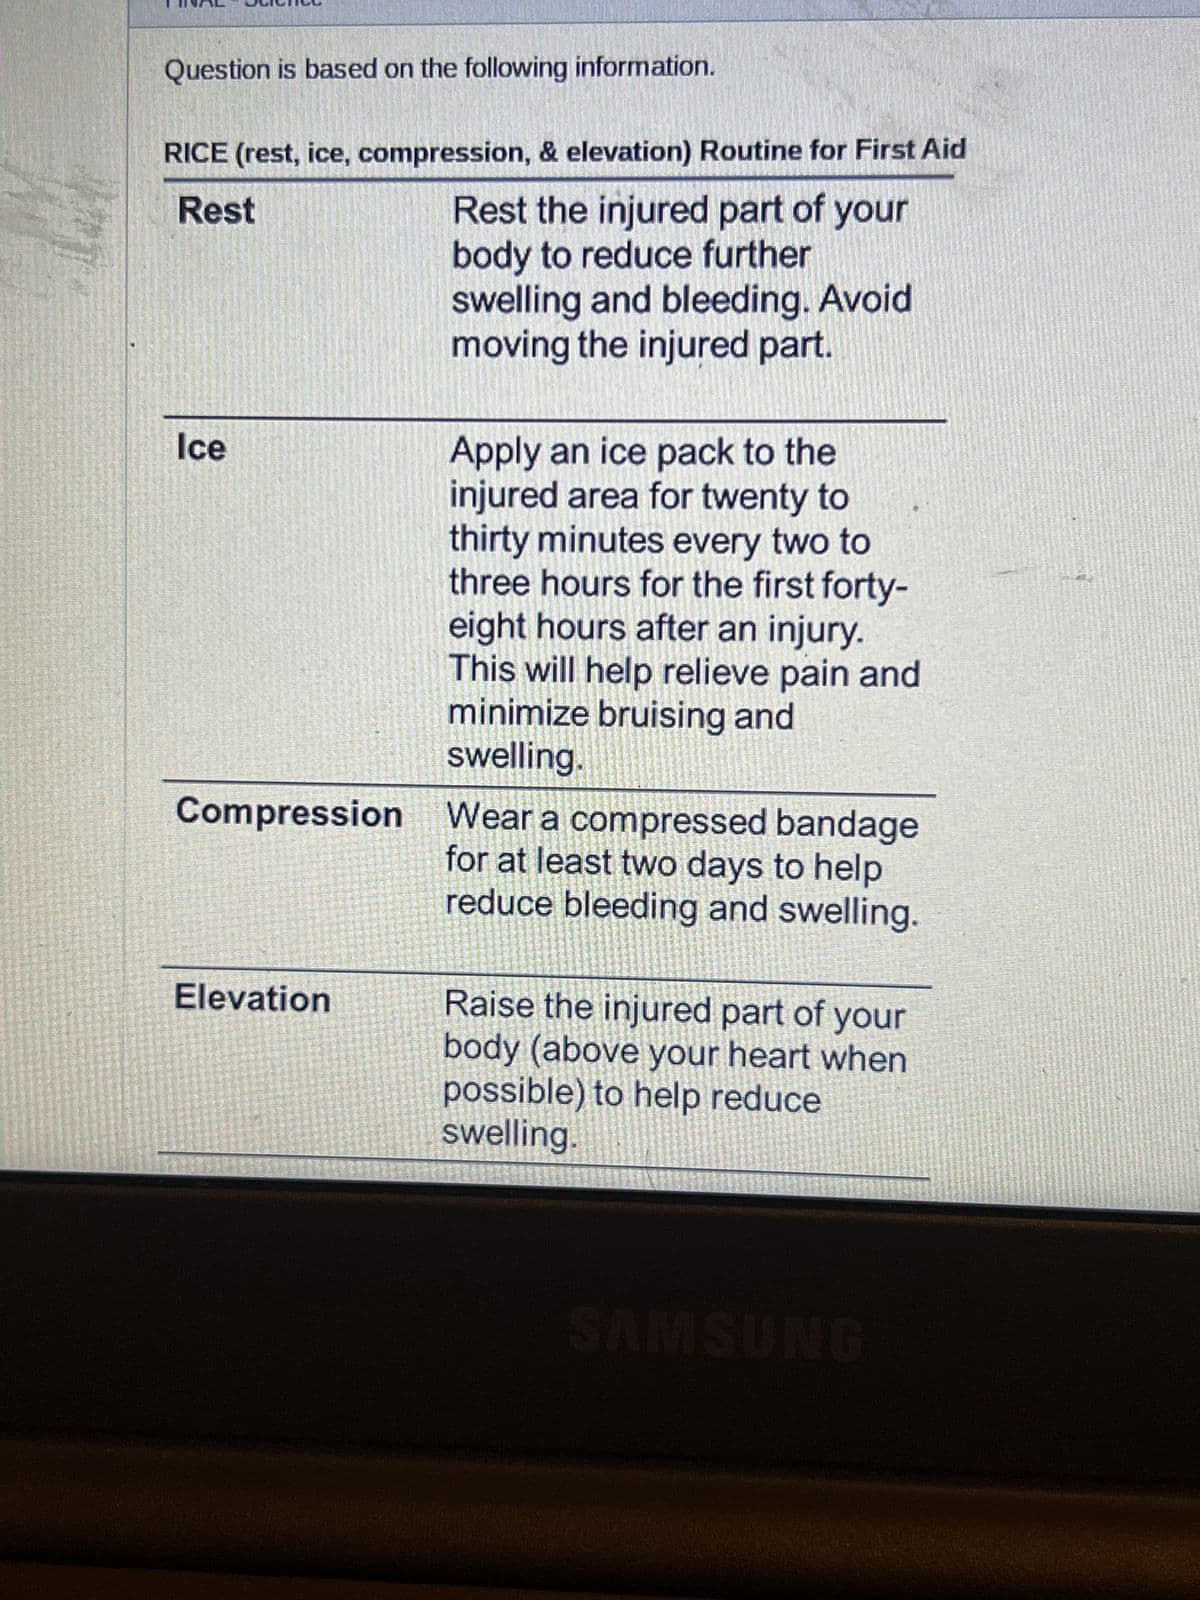 Question is based on the following information.
RICE (rest, ice, compression, & elevation) Routine for First Aid
Rest
Rest the injured part of your
body to reduce further
swelling and bleeding. Avoid
moving the injured part.
Ice
Compression Wear a compressed bandage
for at least two days to help
reduce bleeding and swelling.
Elevation
Helly
SE
Apply an ice pack to the
injured area for twenty to
thirty minutes every two to
three hours for the first forty-
eight hours after an injury.
This will help relieve pain and
minimize bruising and
swelling.
MA
Raise the injured part of your
body (above your heart when
possible) to help reduce
swelling
SAMSUNG